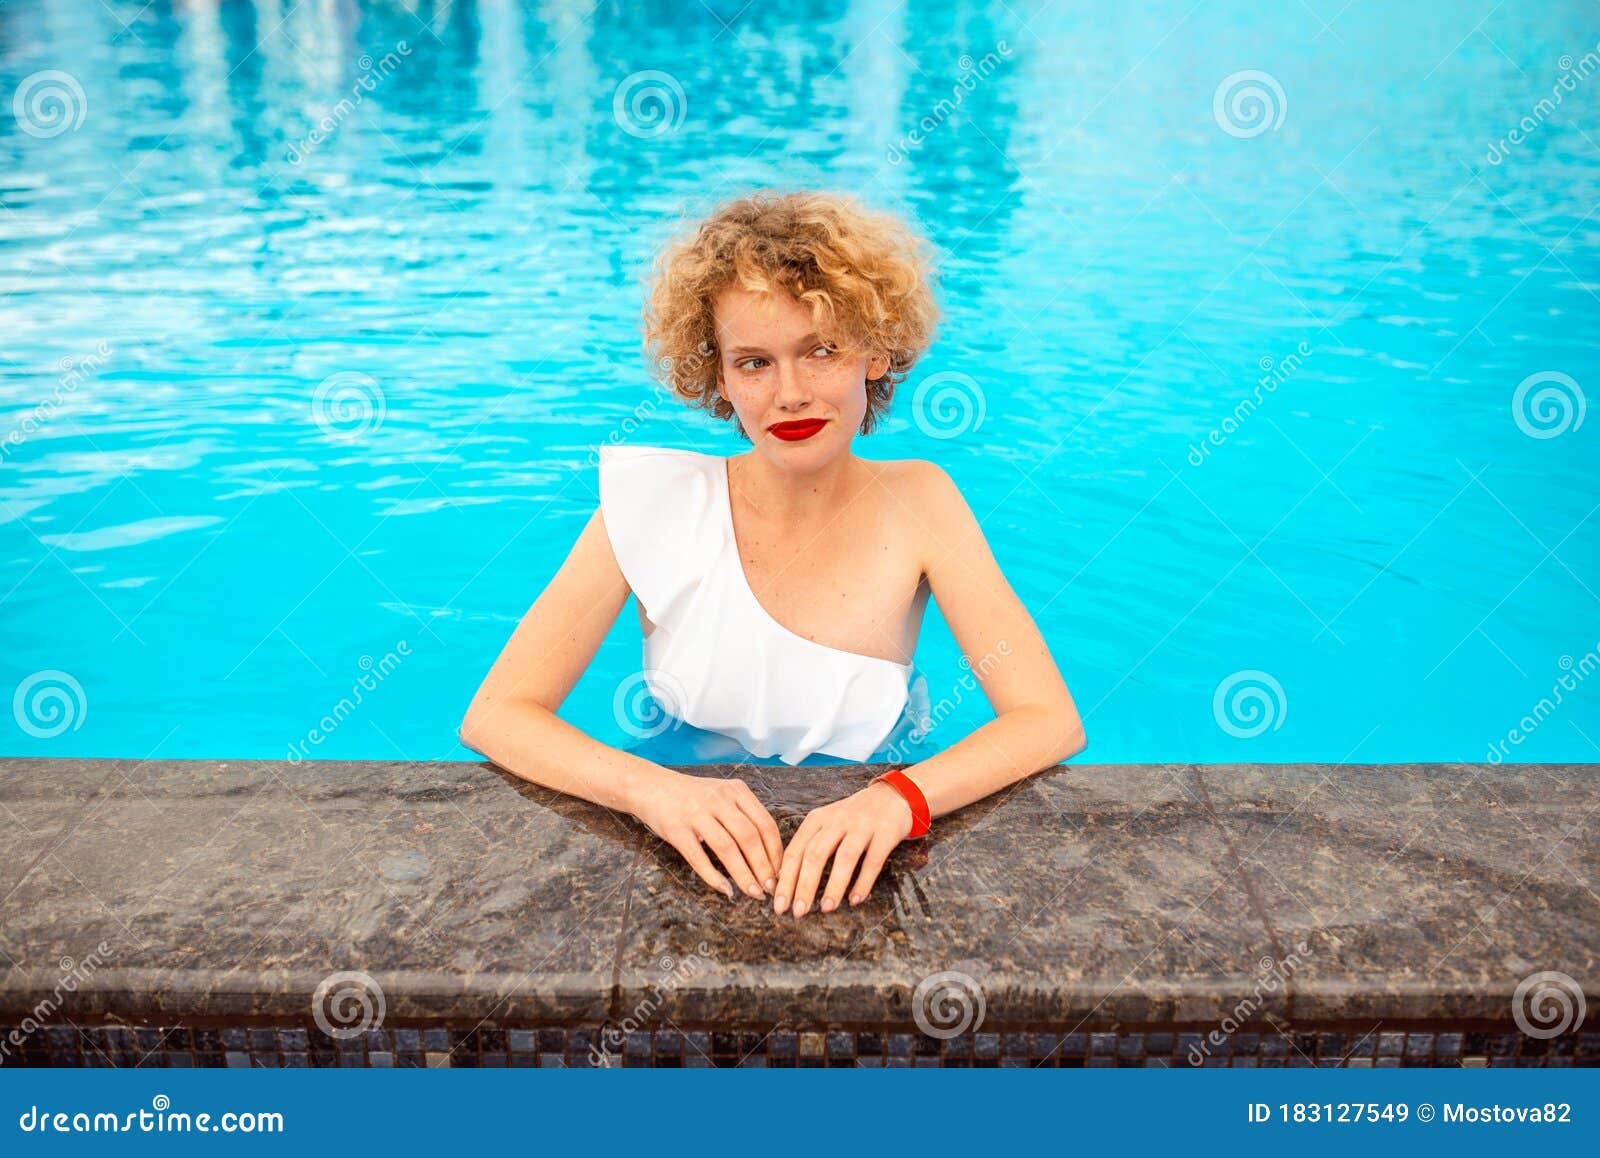 Beautiful Redhead Sitting By The Swimming Pool Stock Image Image Of Leisure Ginger 183127549 